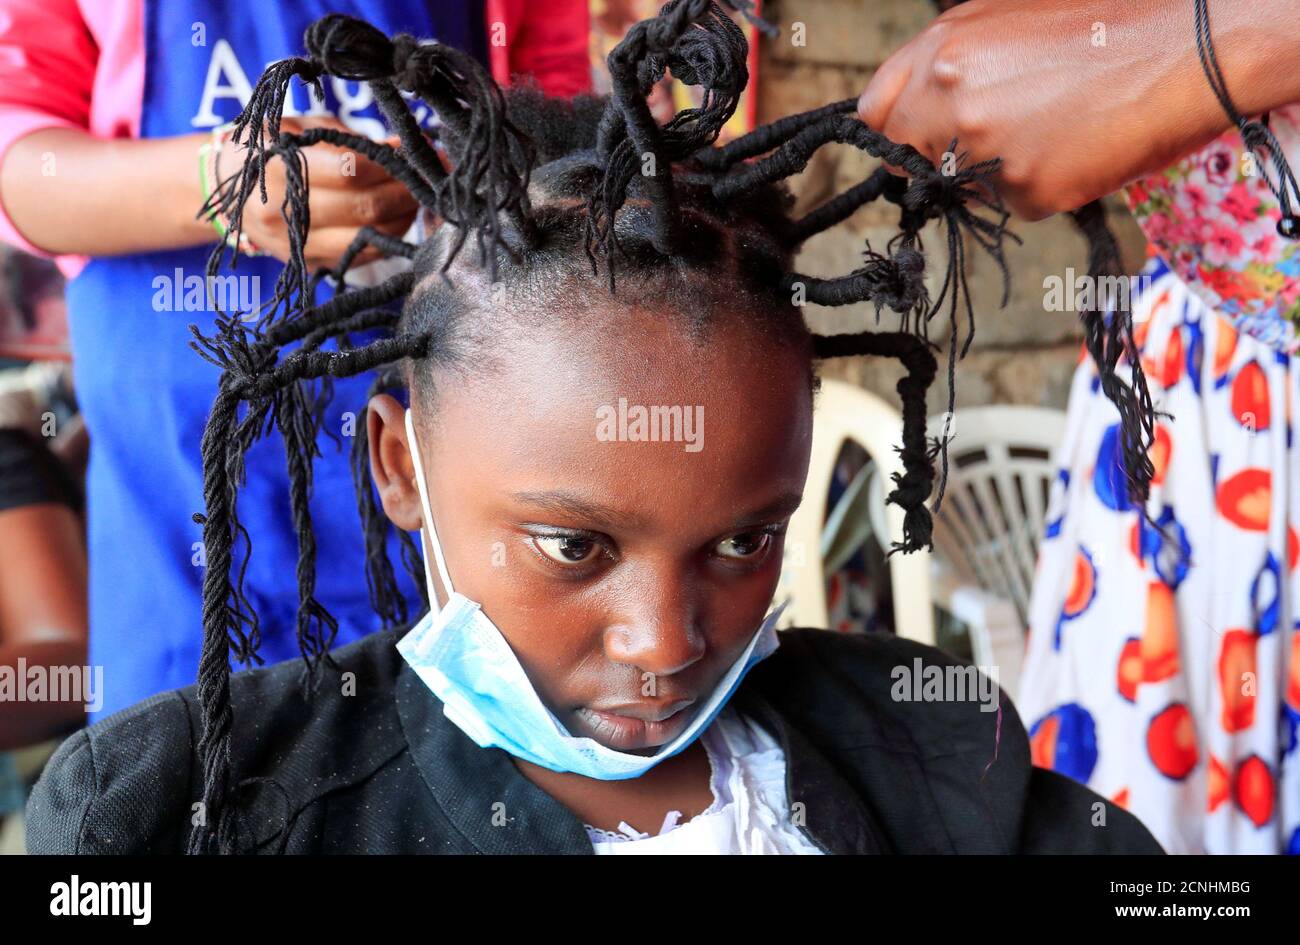 Martha Apisa, 12, gets plaited with the 'coronavirus' hairstyle, designed to emulate the prickly appearance of the virus under a microscope, as a fashion statement against the spread of the coronavirus disease (COVID-19), at Mama Brayo Beauty Salon within Kambi-Muru village of Kibera slums in Nairobi, Kenya April 29, 2020. Picture taken April 29, 2020. REUTERS/Thomas Mukoya Stock Photo